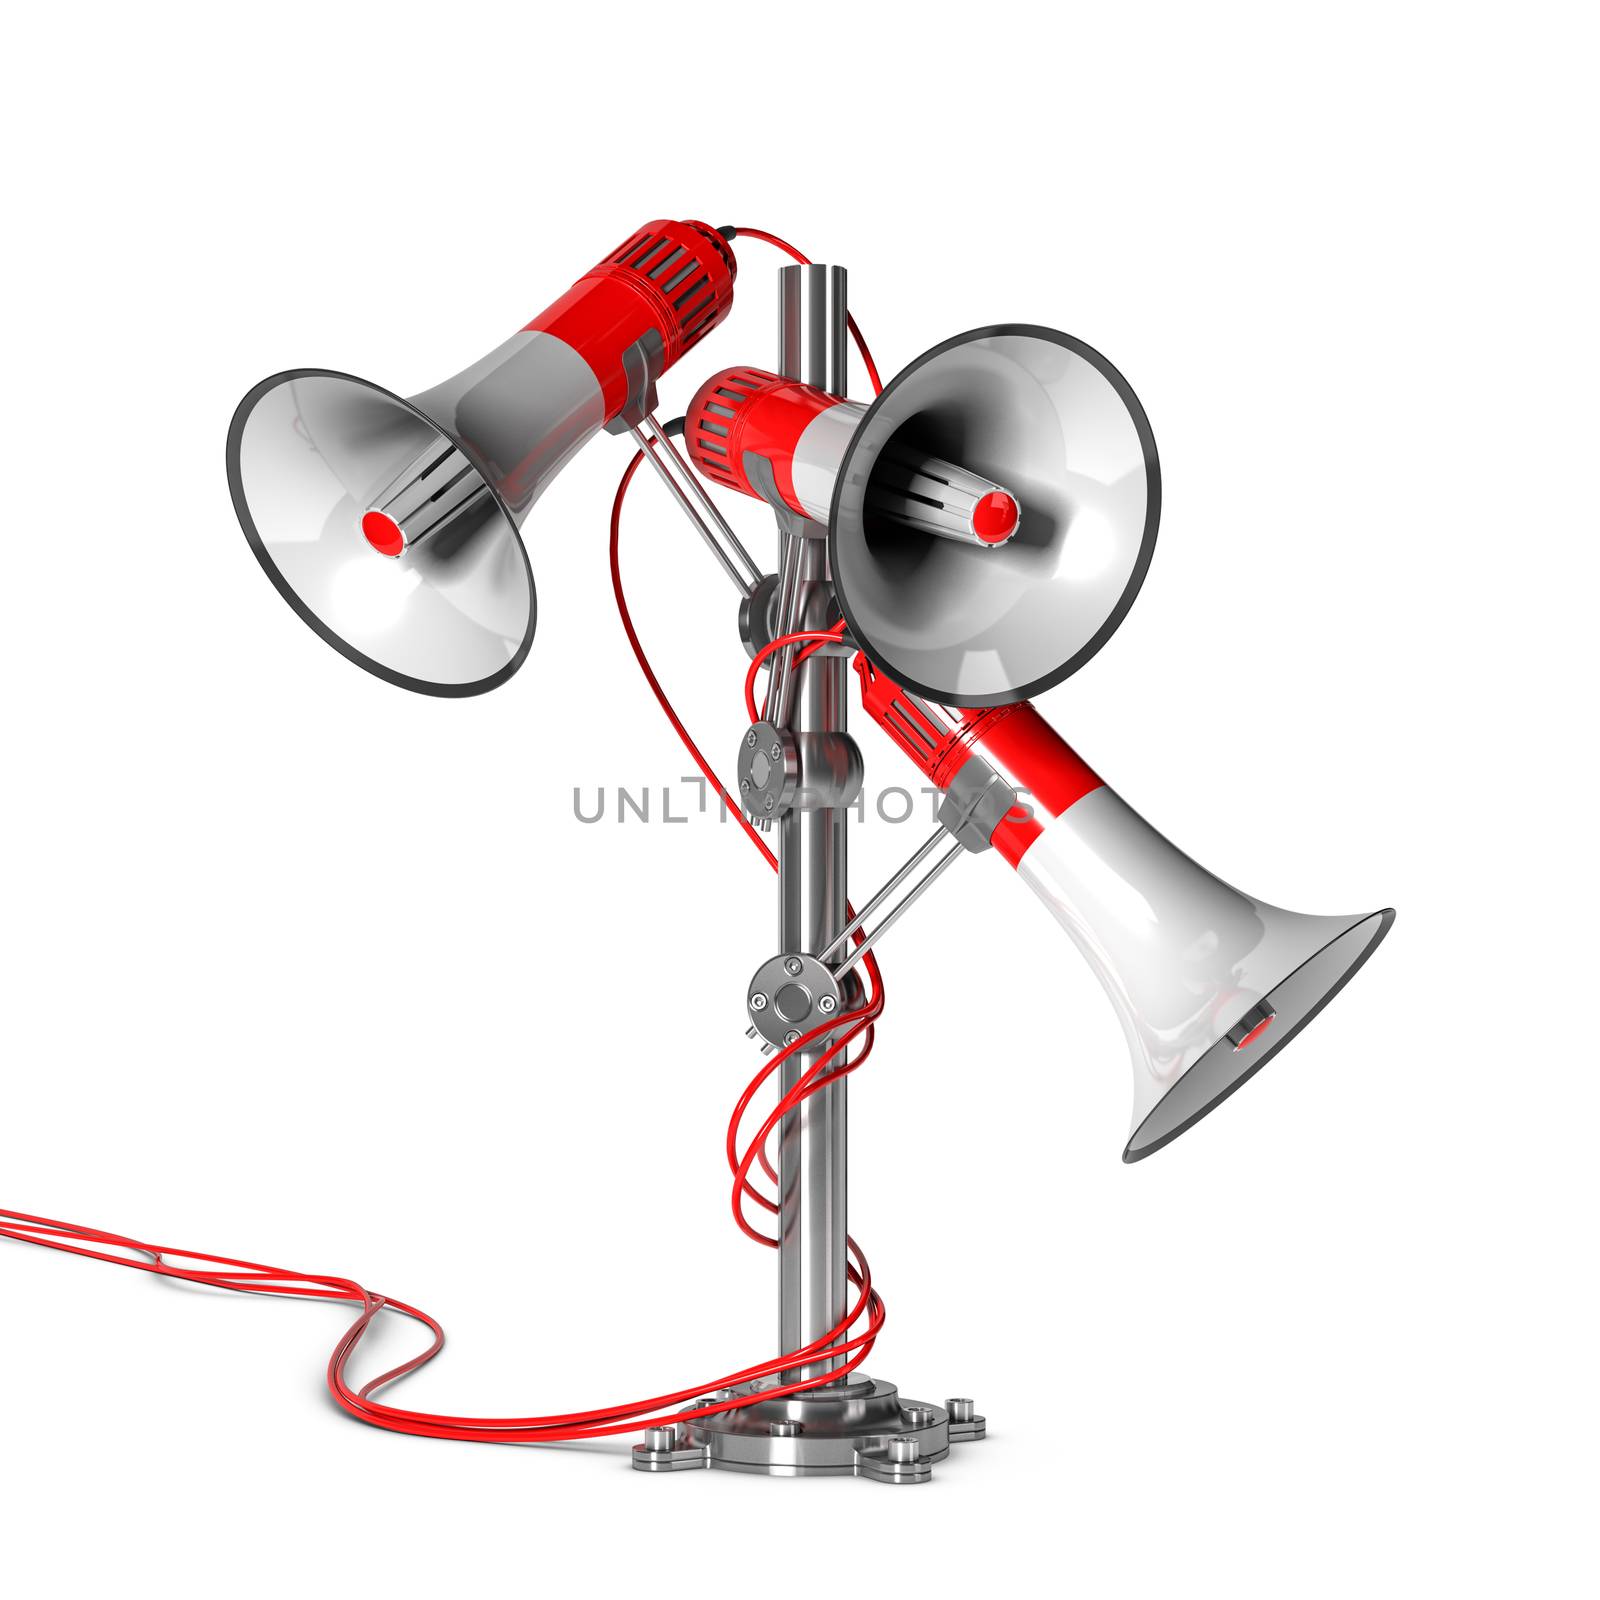 3D illustration of three loudspeakers mounted on a pole over white background.